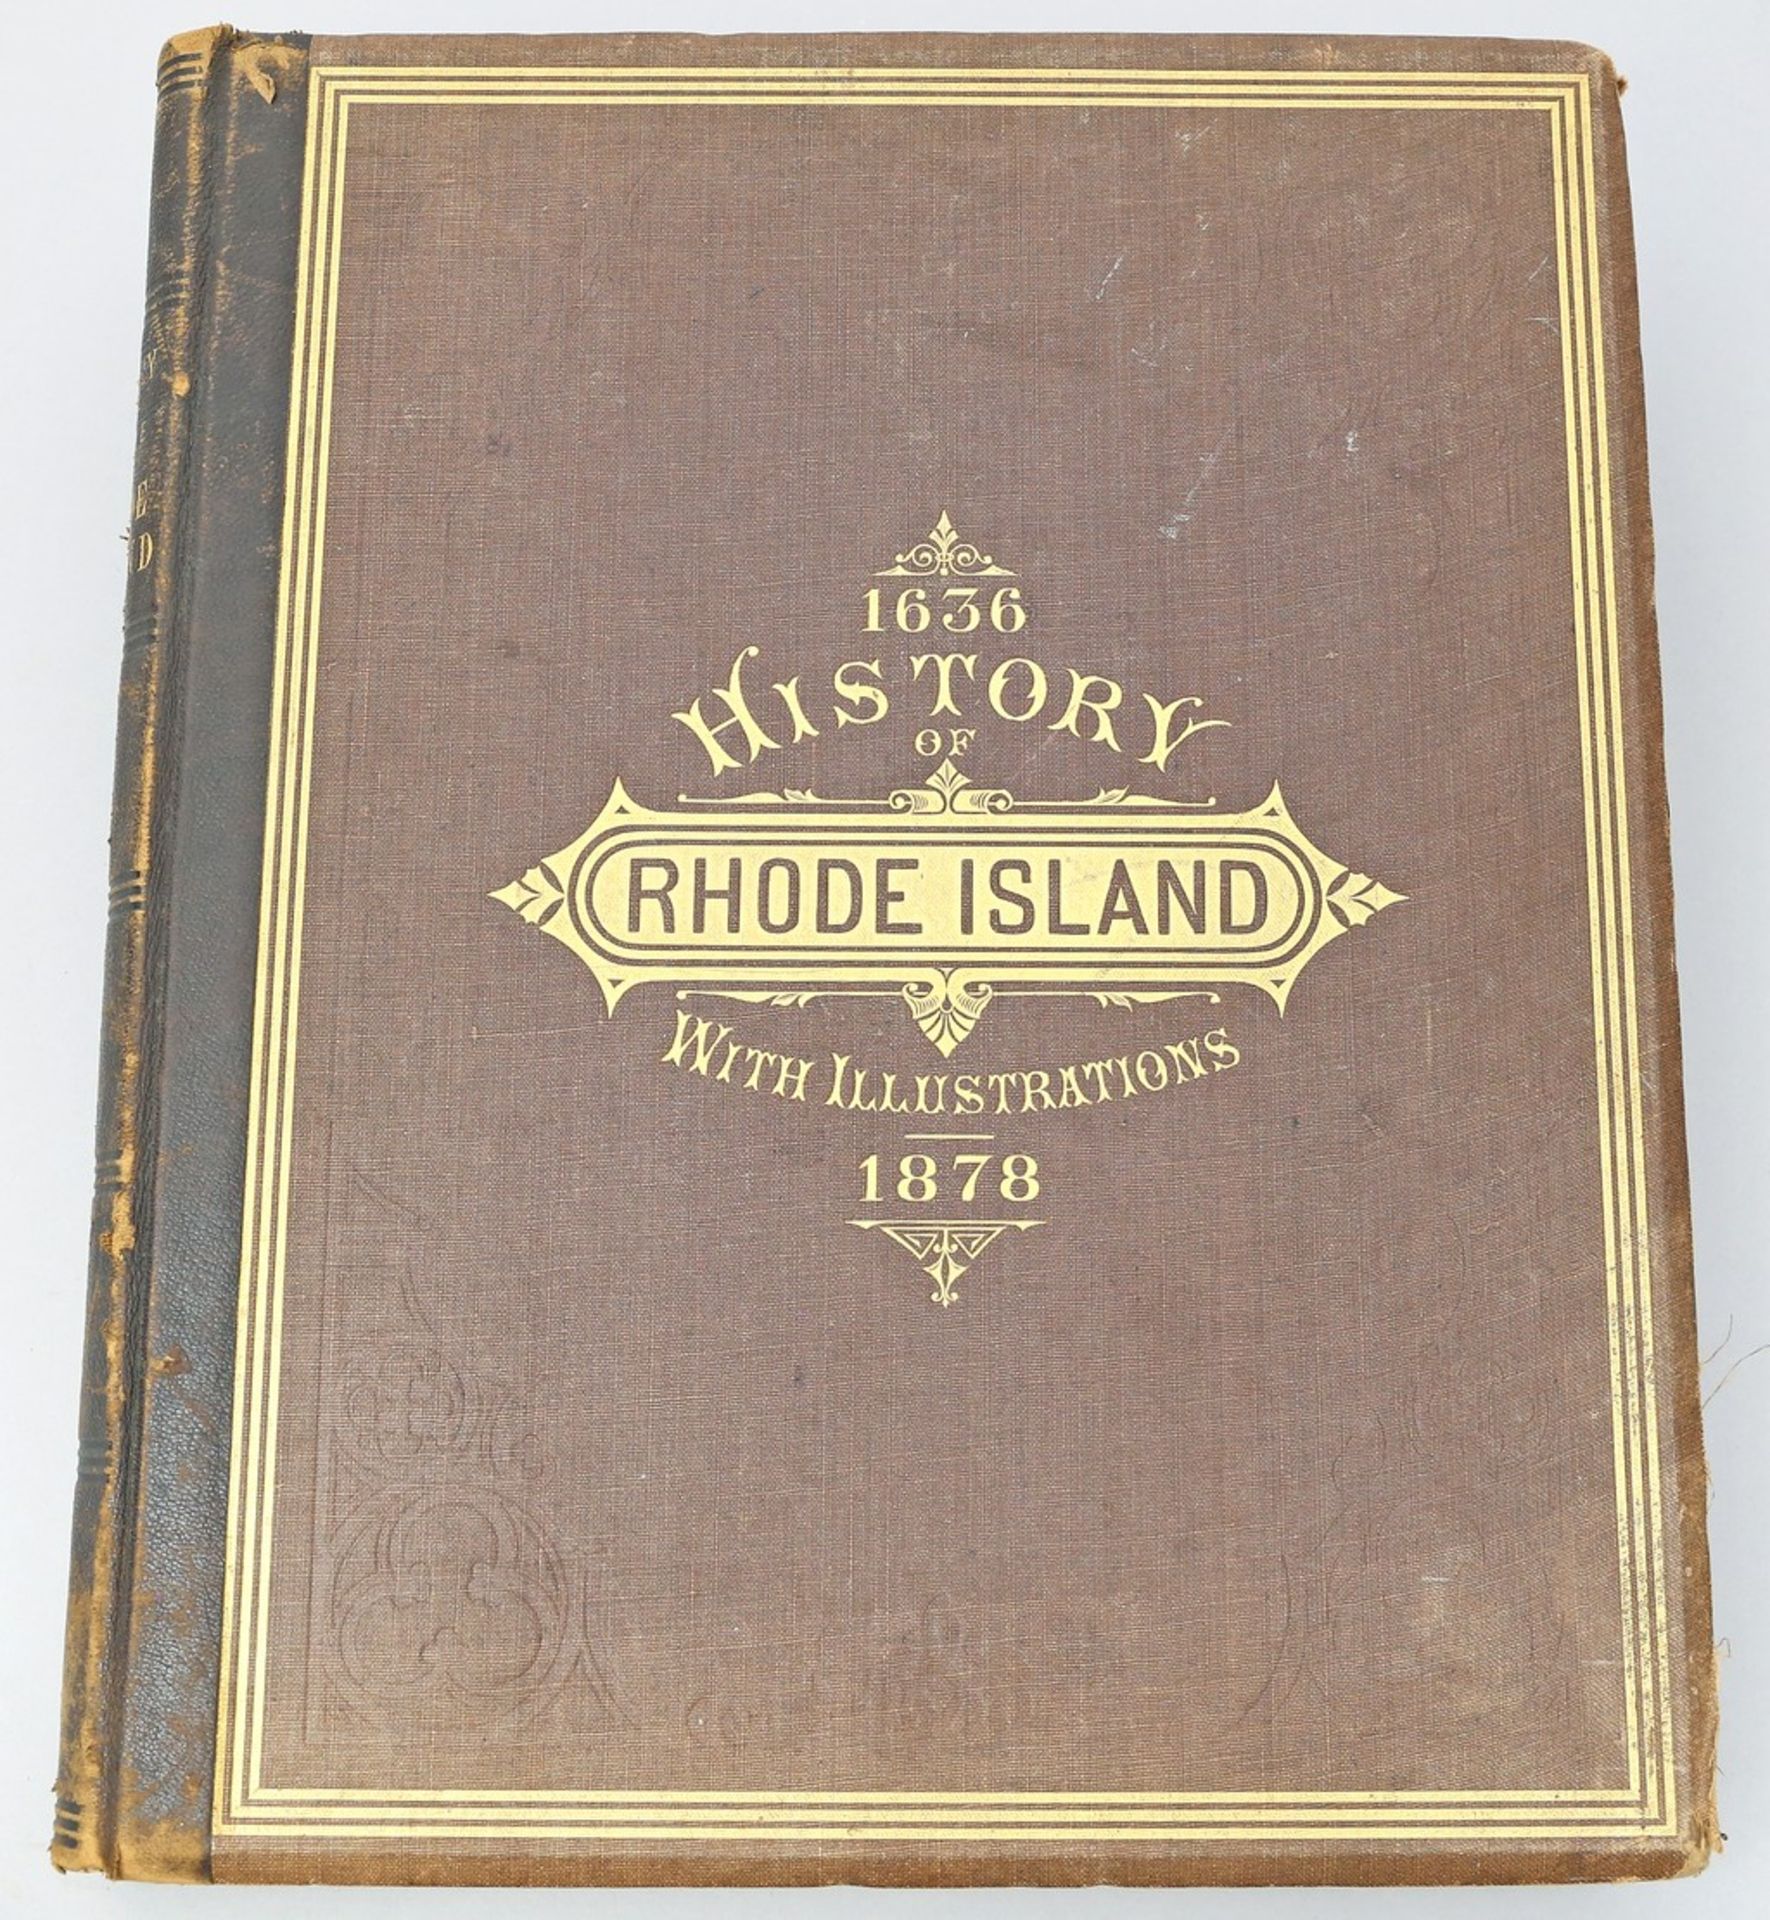 "1636. History of the State of Rhode Island.", 1878.